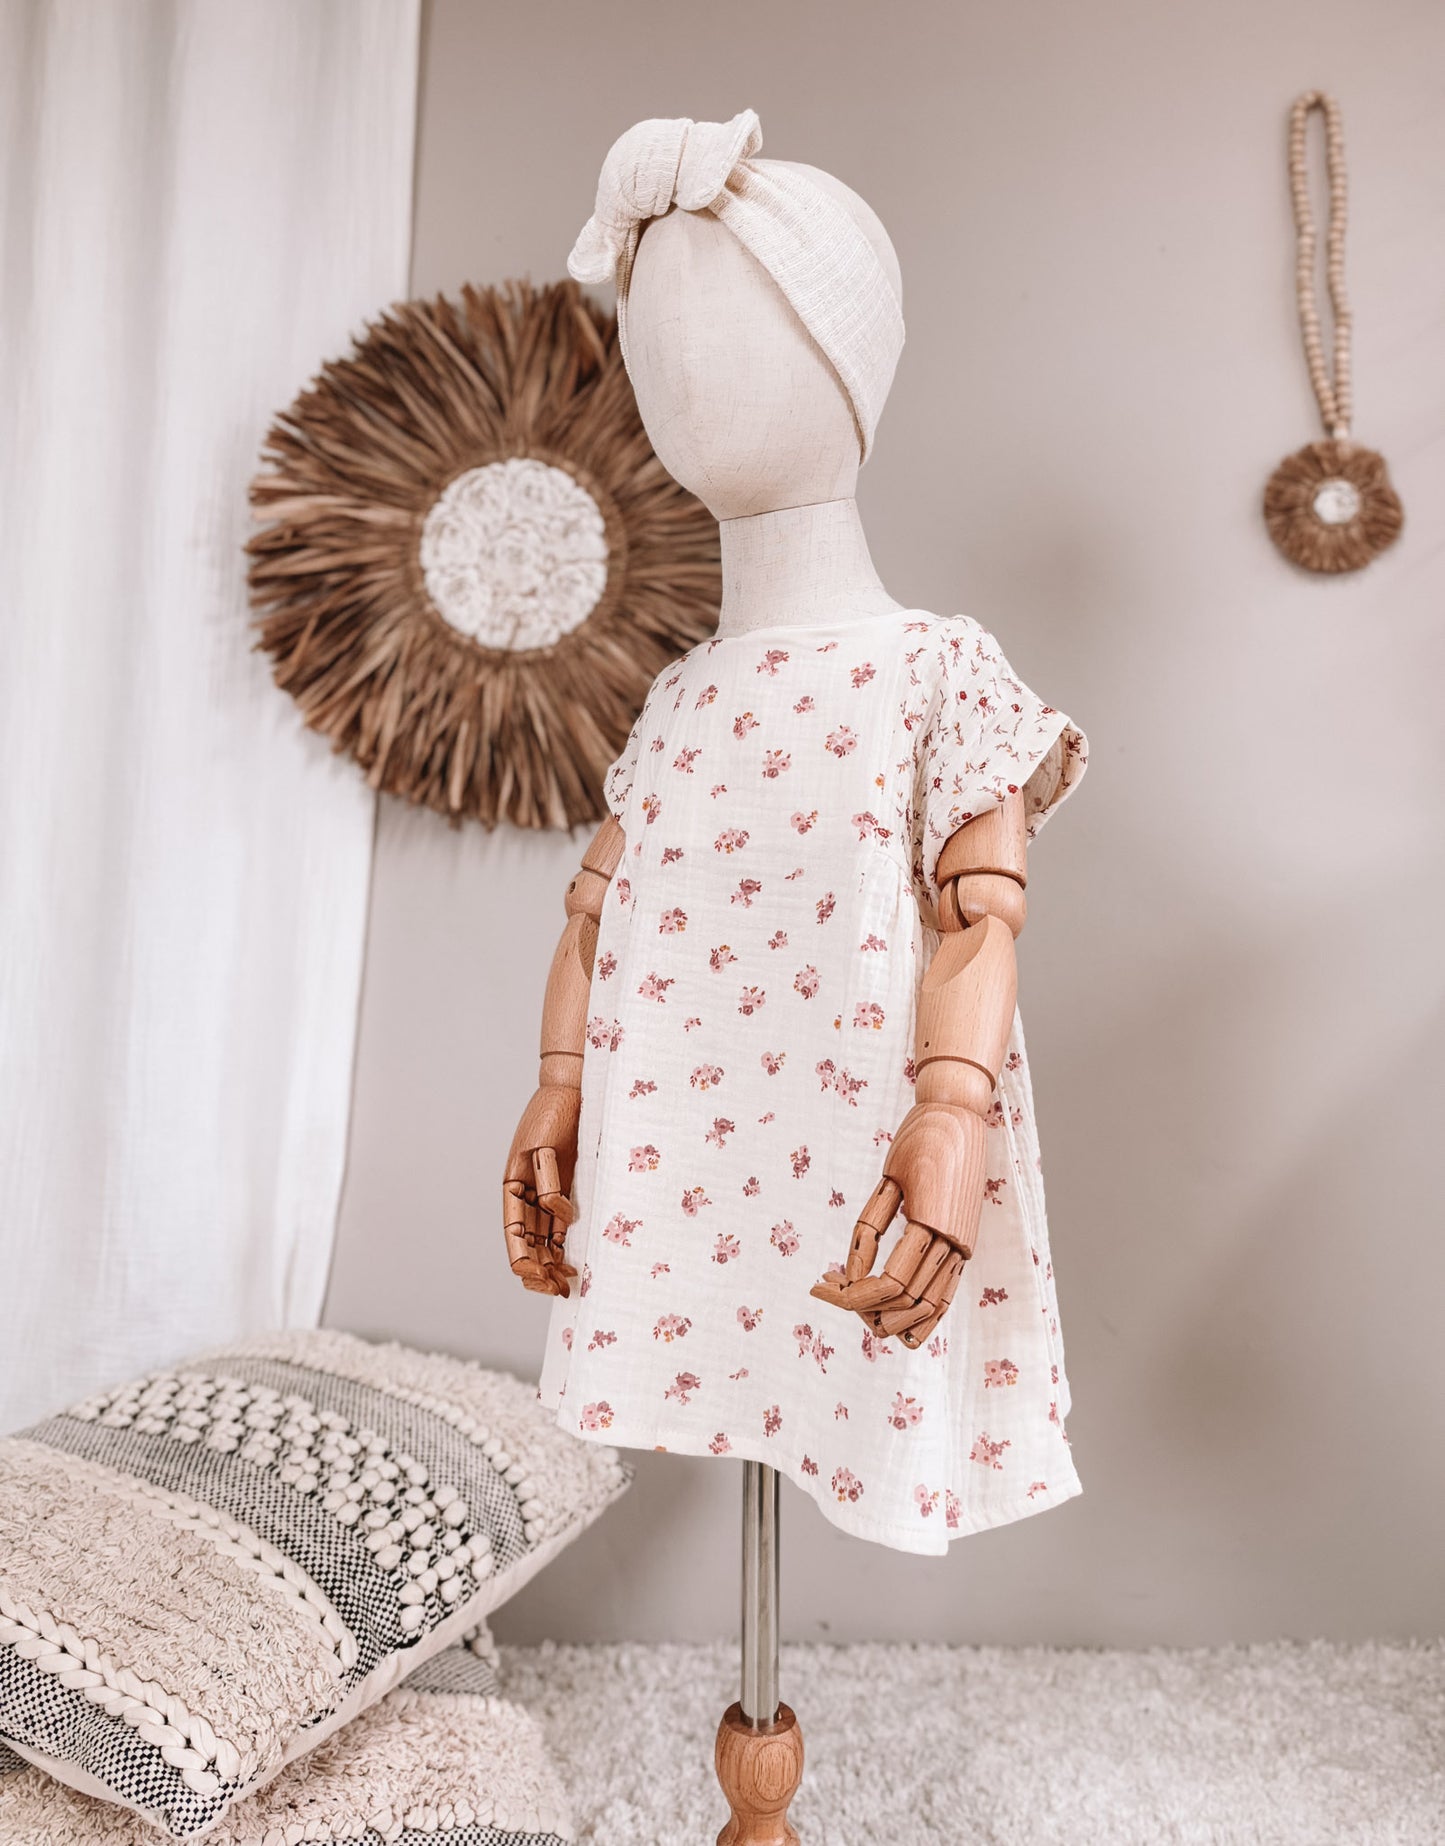 Load image into Gallery viewer, Malia baby dress / vintage floral
